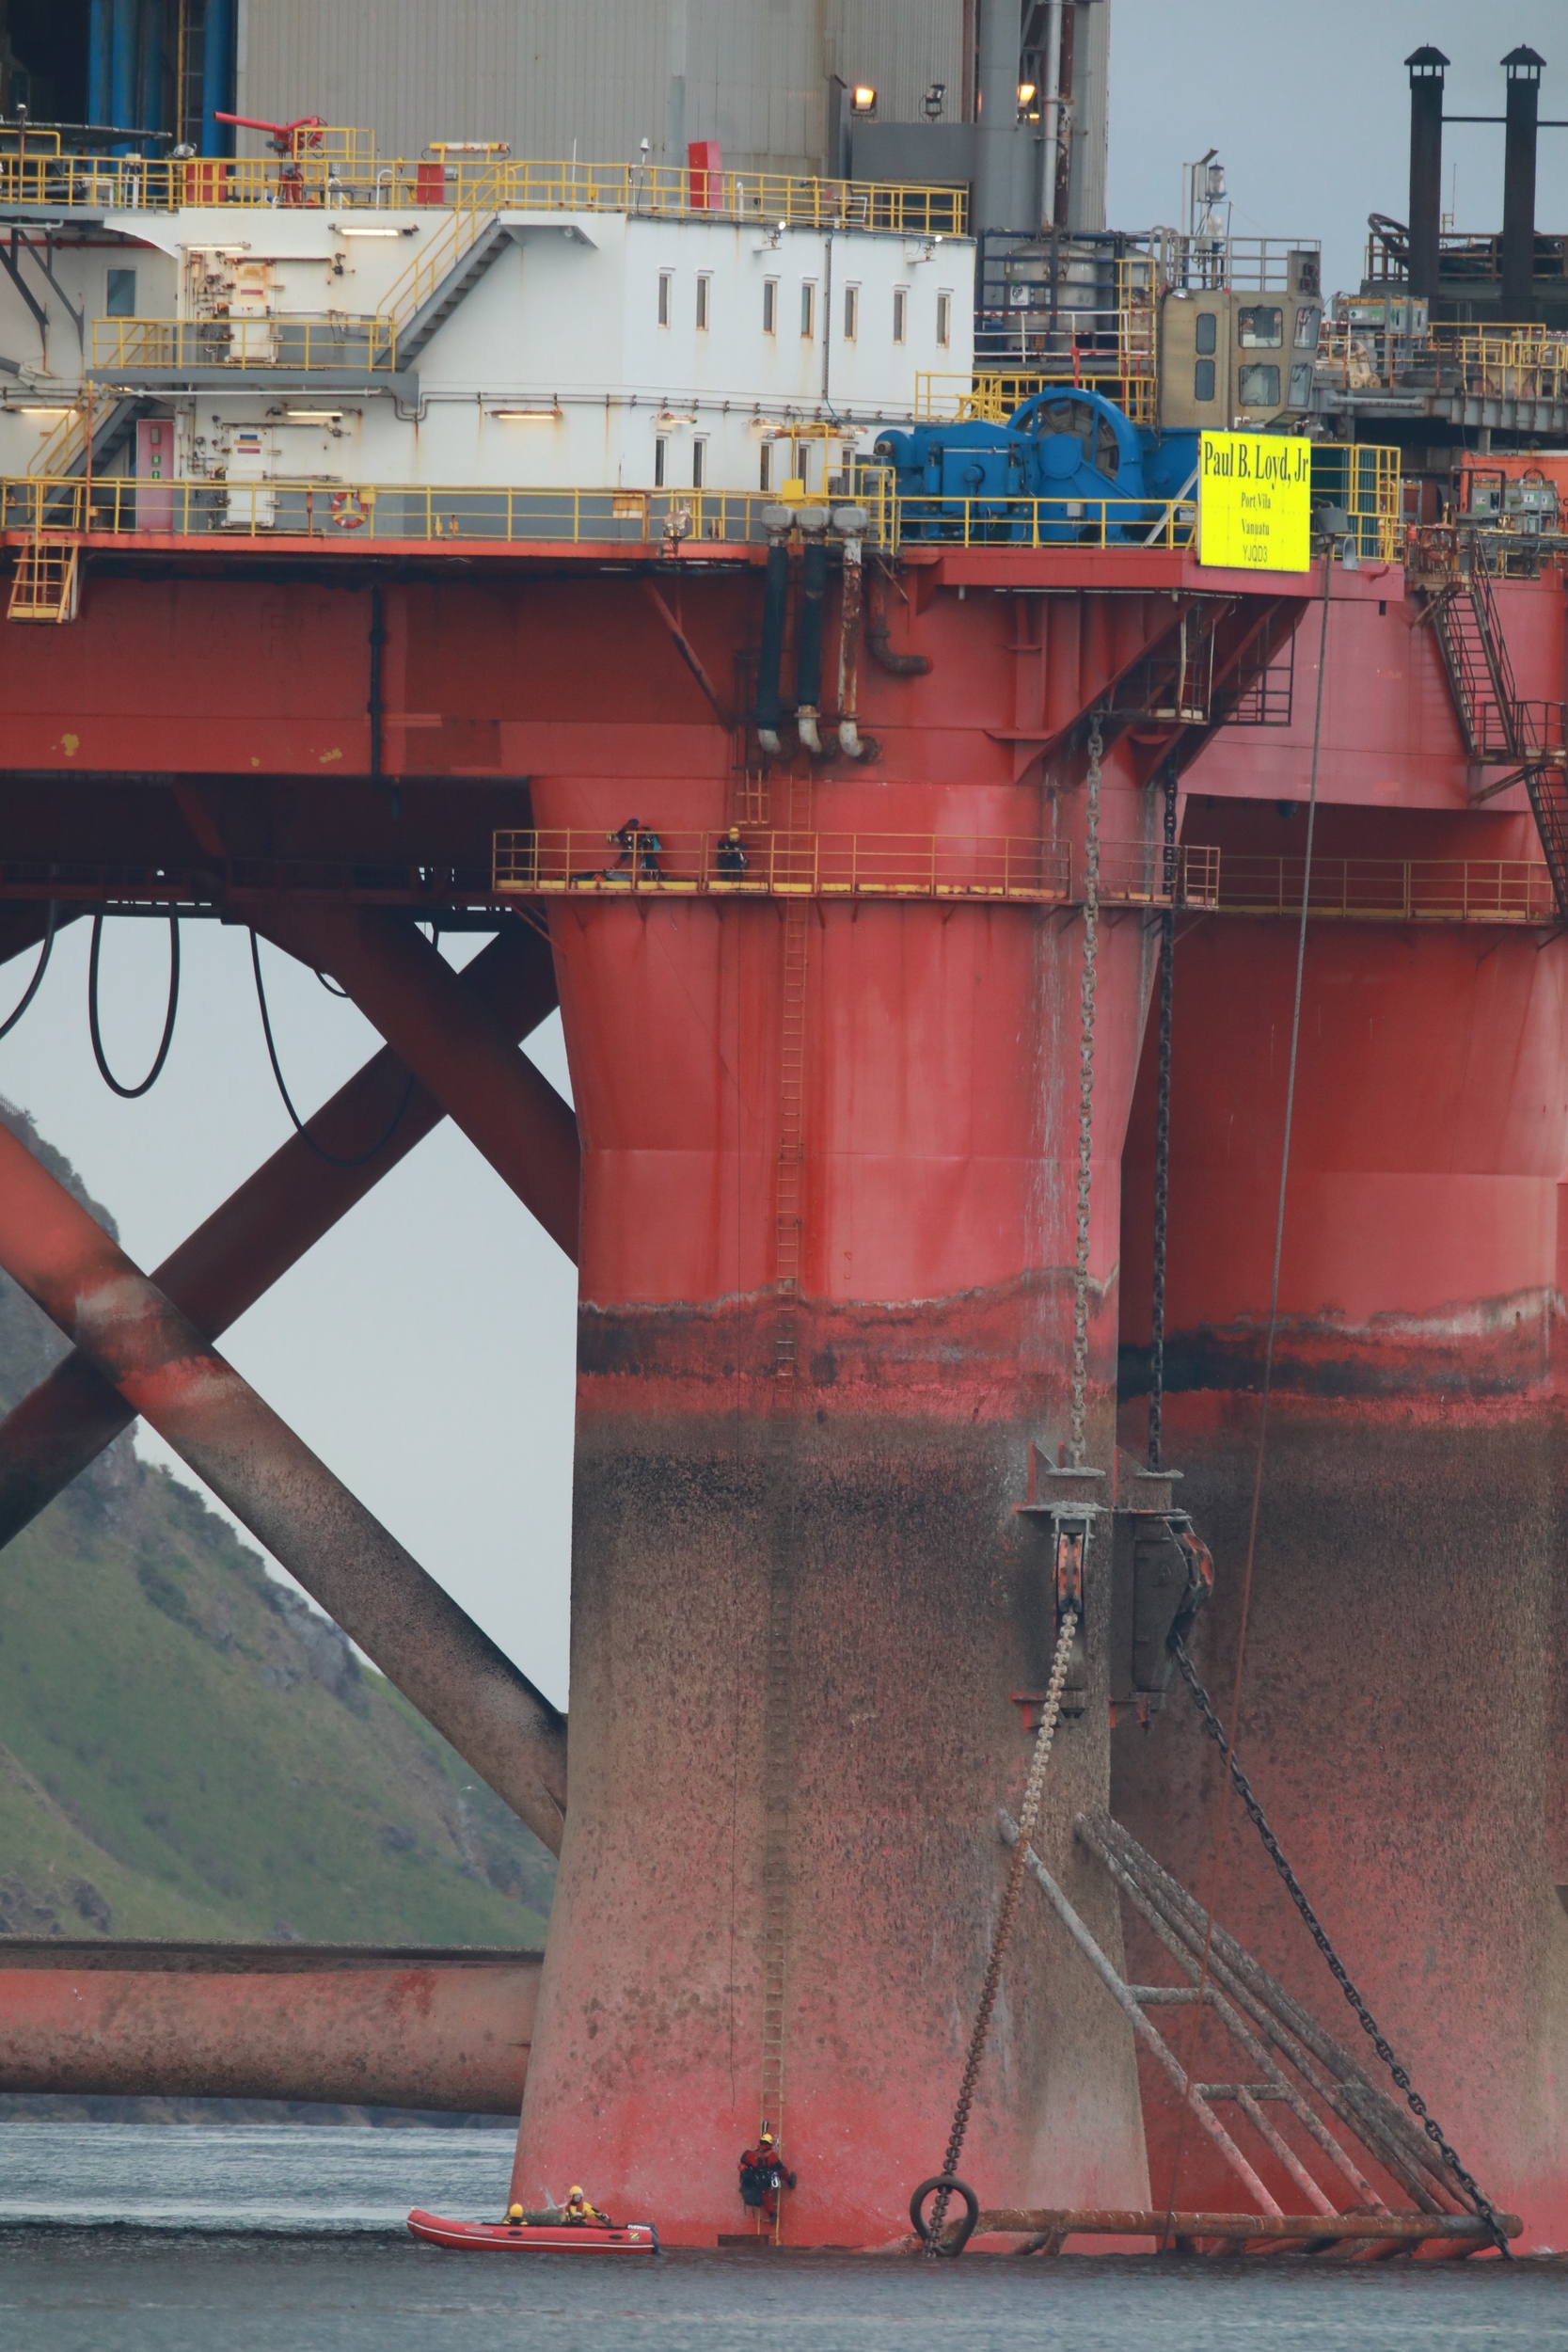 3 Greenpeace activists climbing on to a oil rig - believed to be operated by BP - in Cromarty Firth, Scotland (Greenpeace/PA)